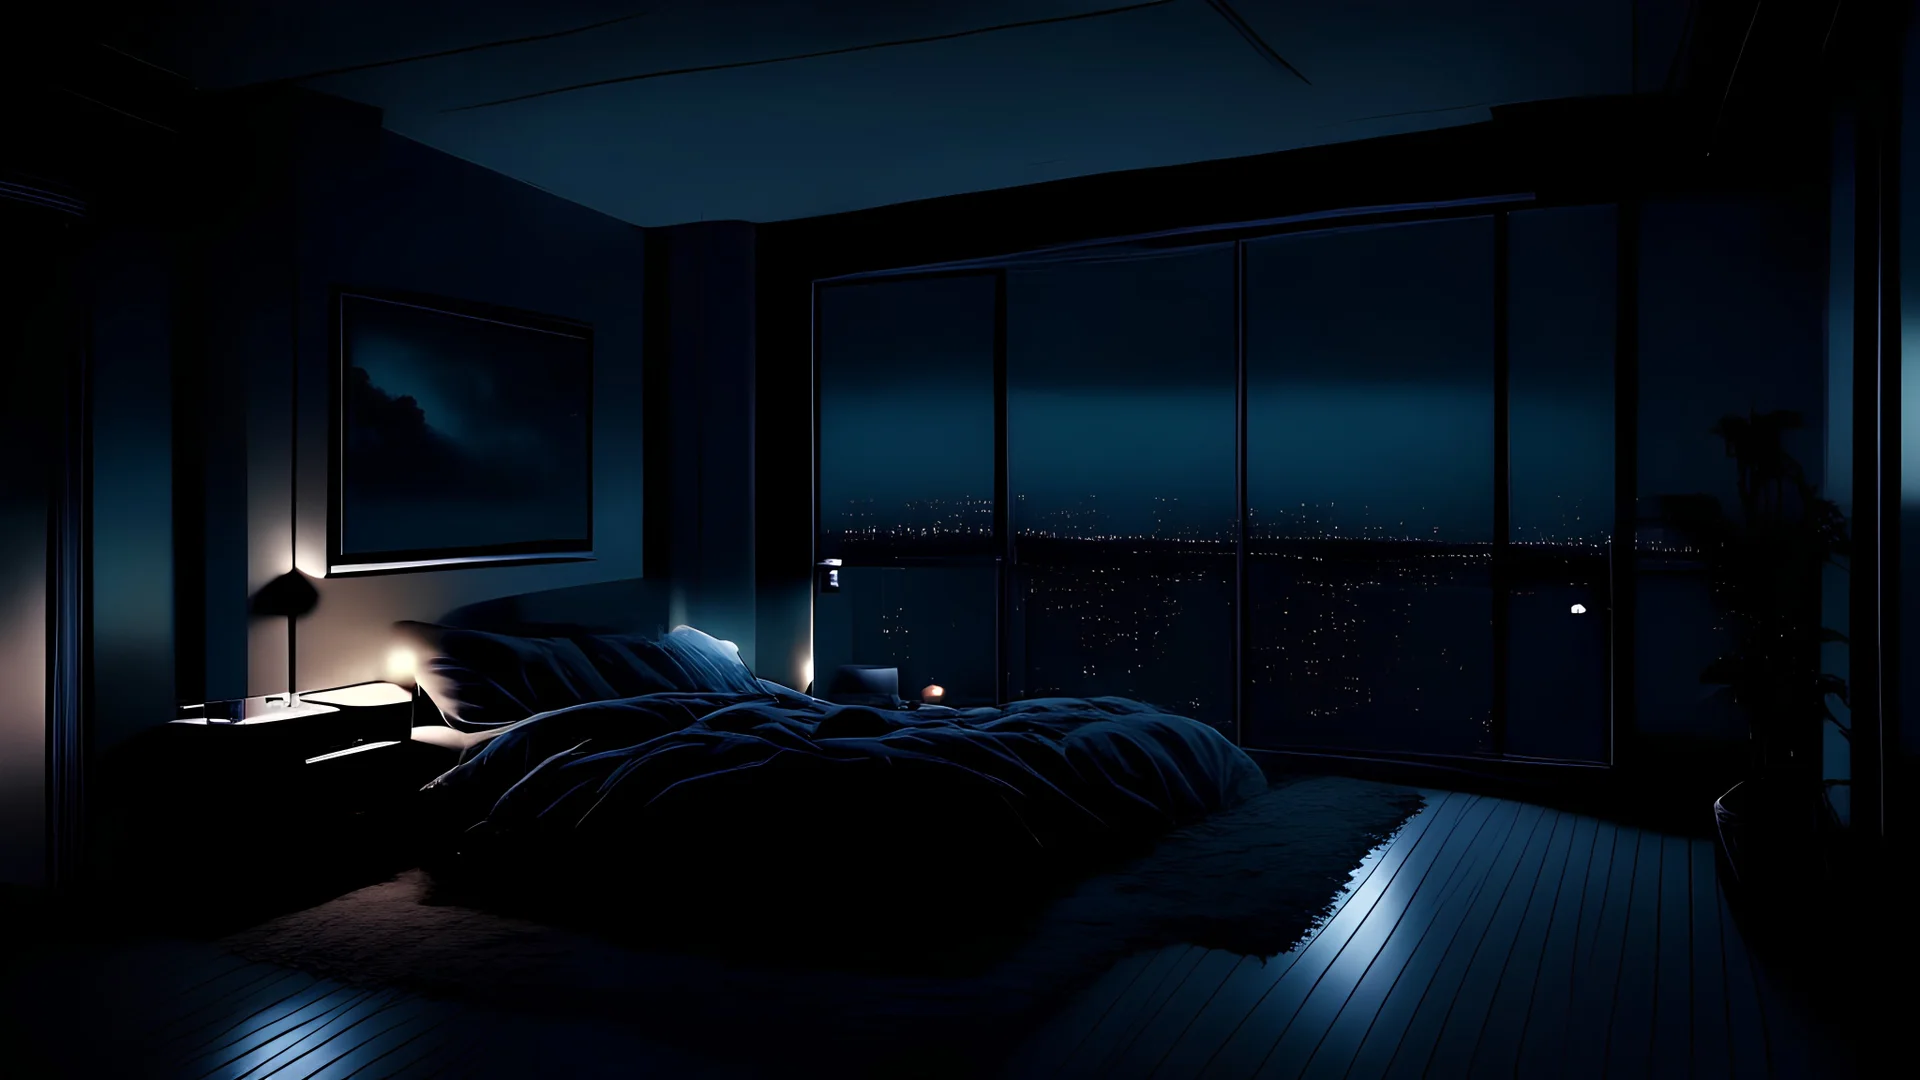 penthouse bedroom at night, dark gloomy, A room with